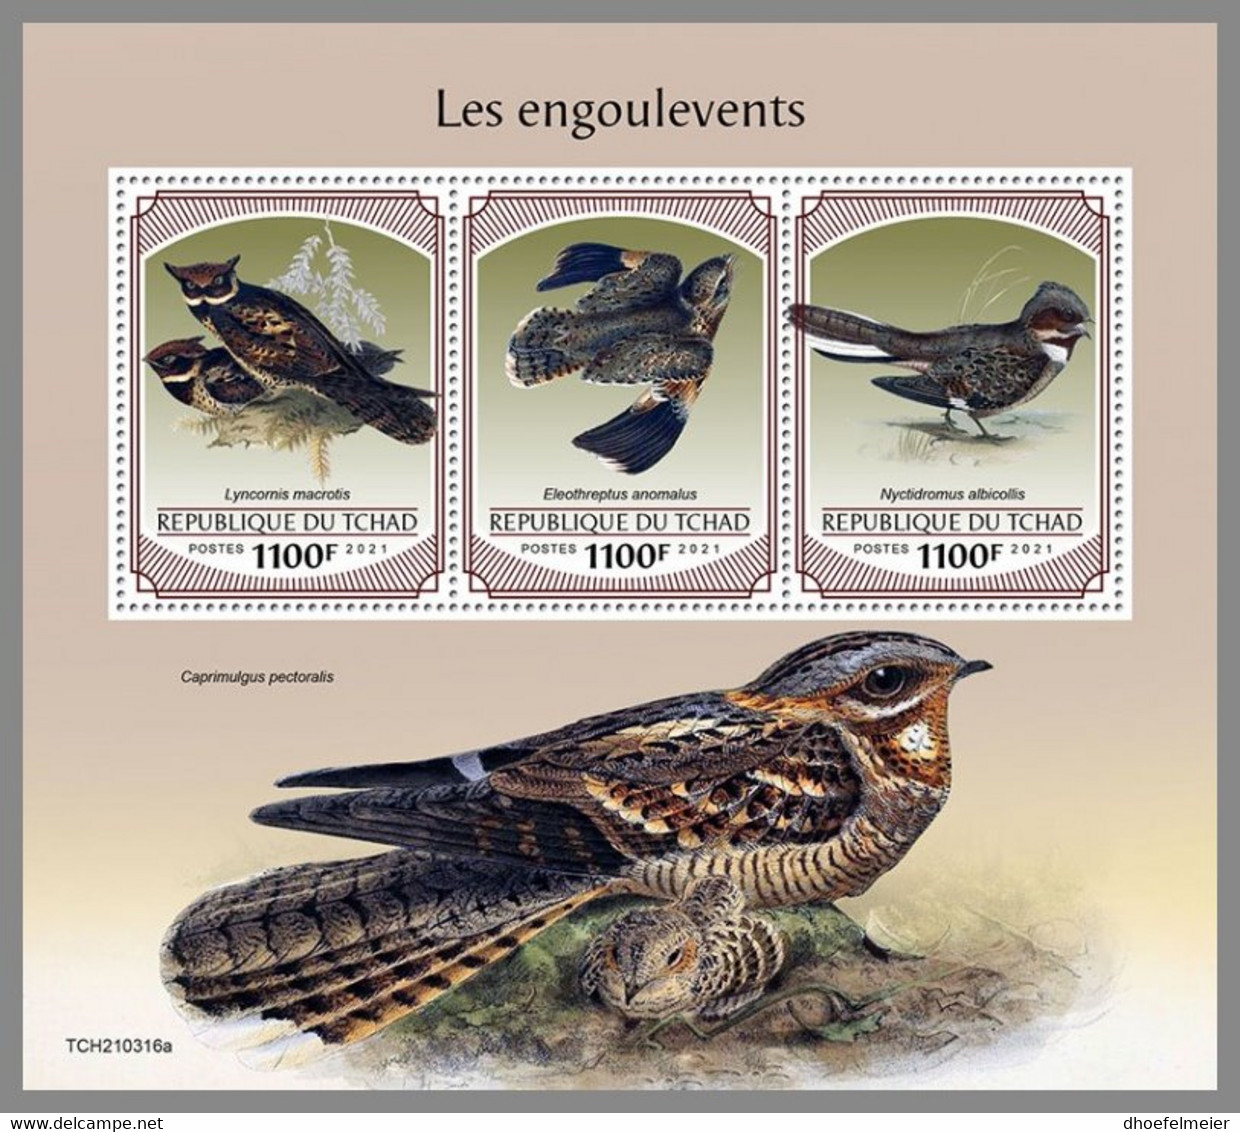 CHAD 2021 MNH Nightjars Nachtschwalben Engoulevents M/S - IMPERFORATED - DHQ2144 - Golondrinas